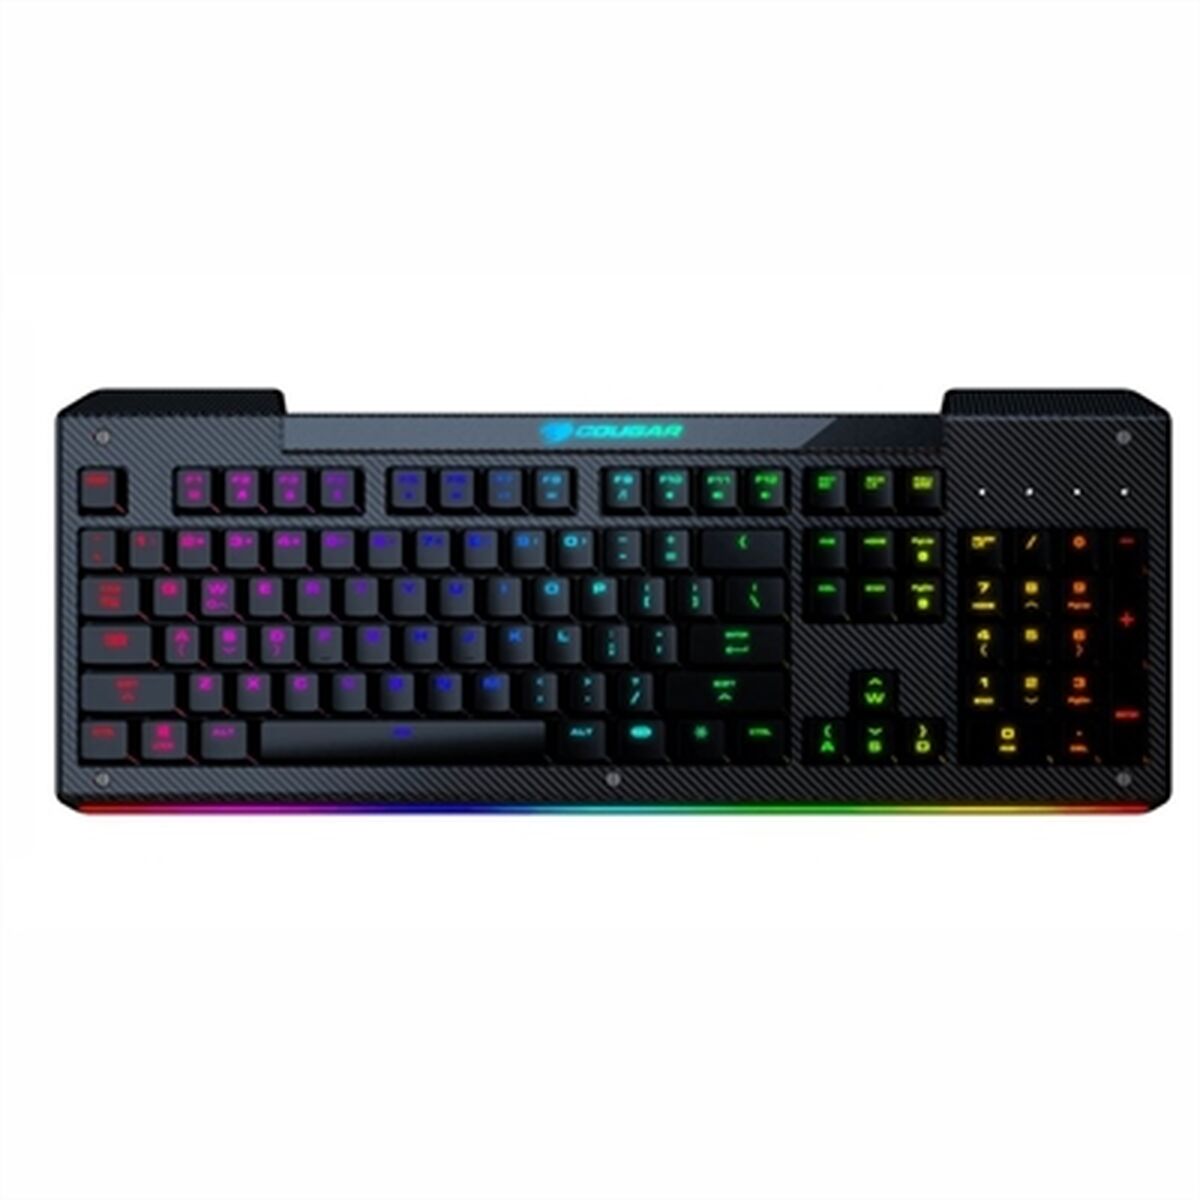 Keyboard Cougar Aurora S Multicolour, Cougar, Computing, Accessories, keyboard-cougar-aurora-s-multicolour, :QWERTY, :Spanish, Brand_Cougar, category-reference-2609, category-reference-2642, category-reference-2646, category-reference-t-19685, category-reference-t-19908, category-reference-t-21353, computers / peripherals, Condition_NEW, office, Price_20 - 50, RiotNook